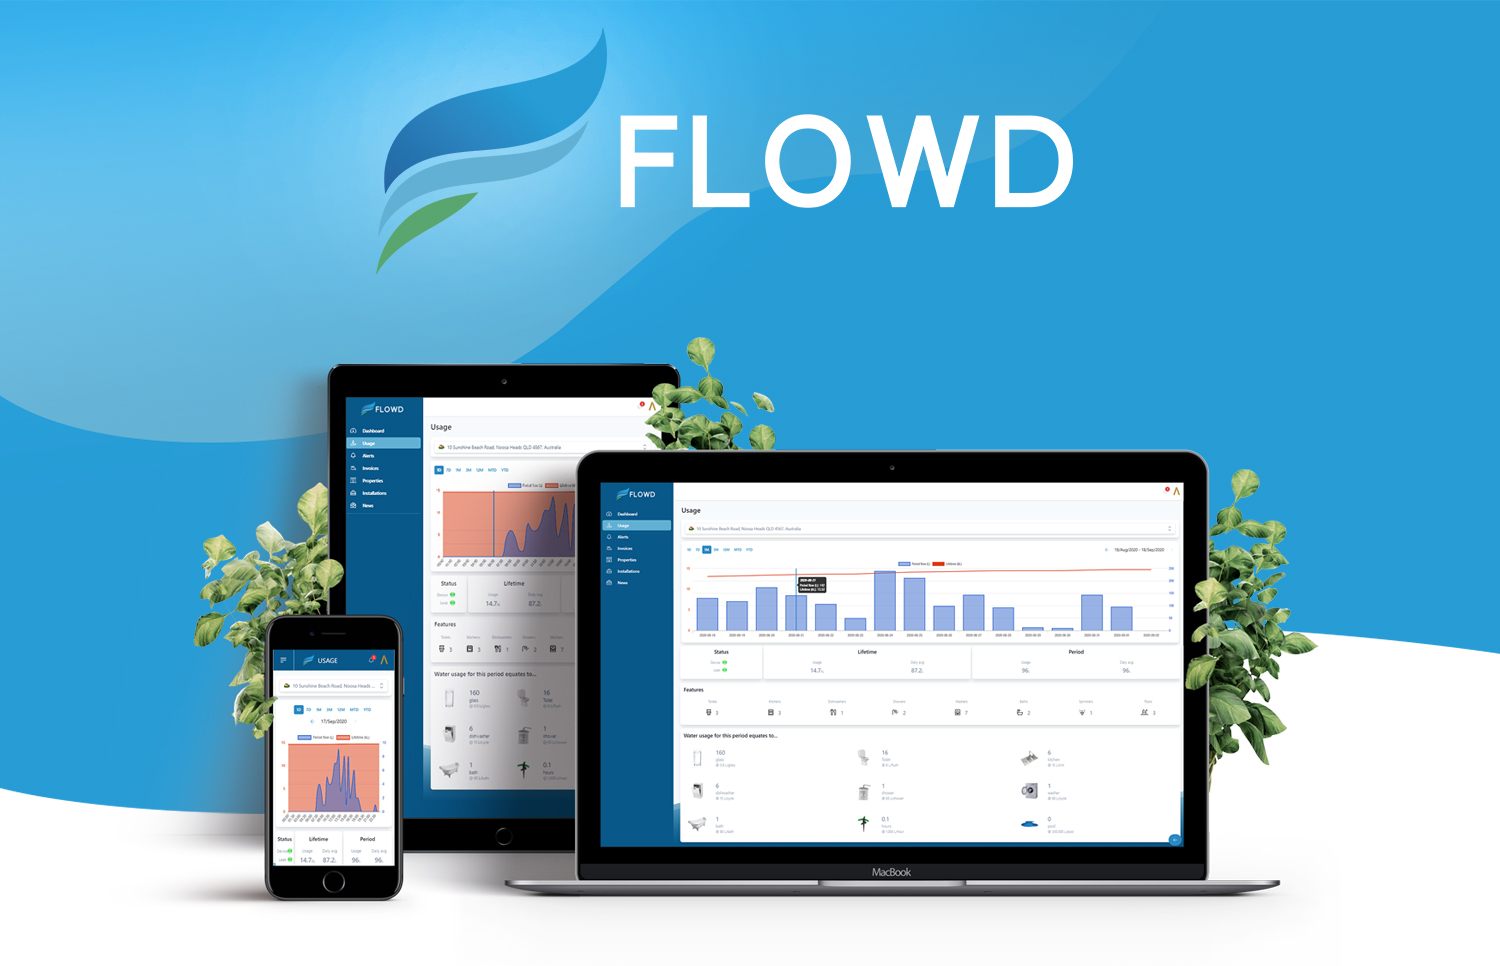 The Flowd app works with any device